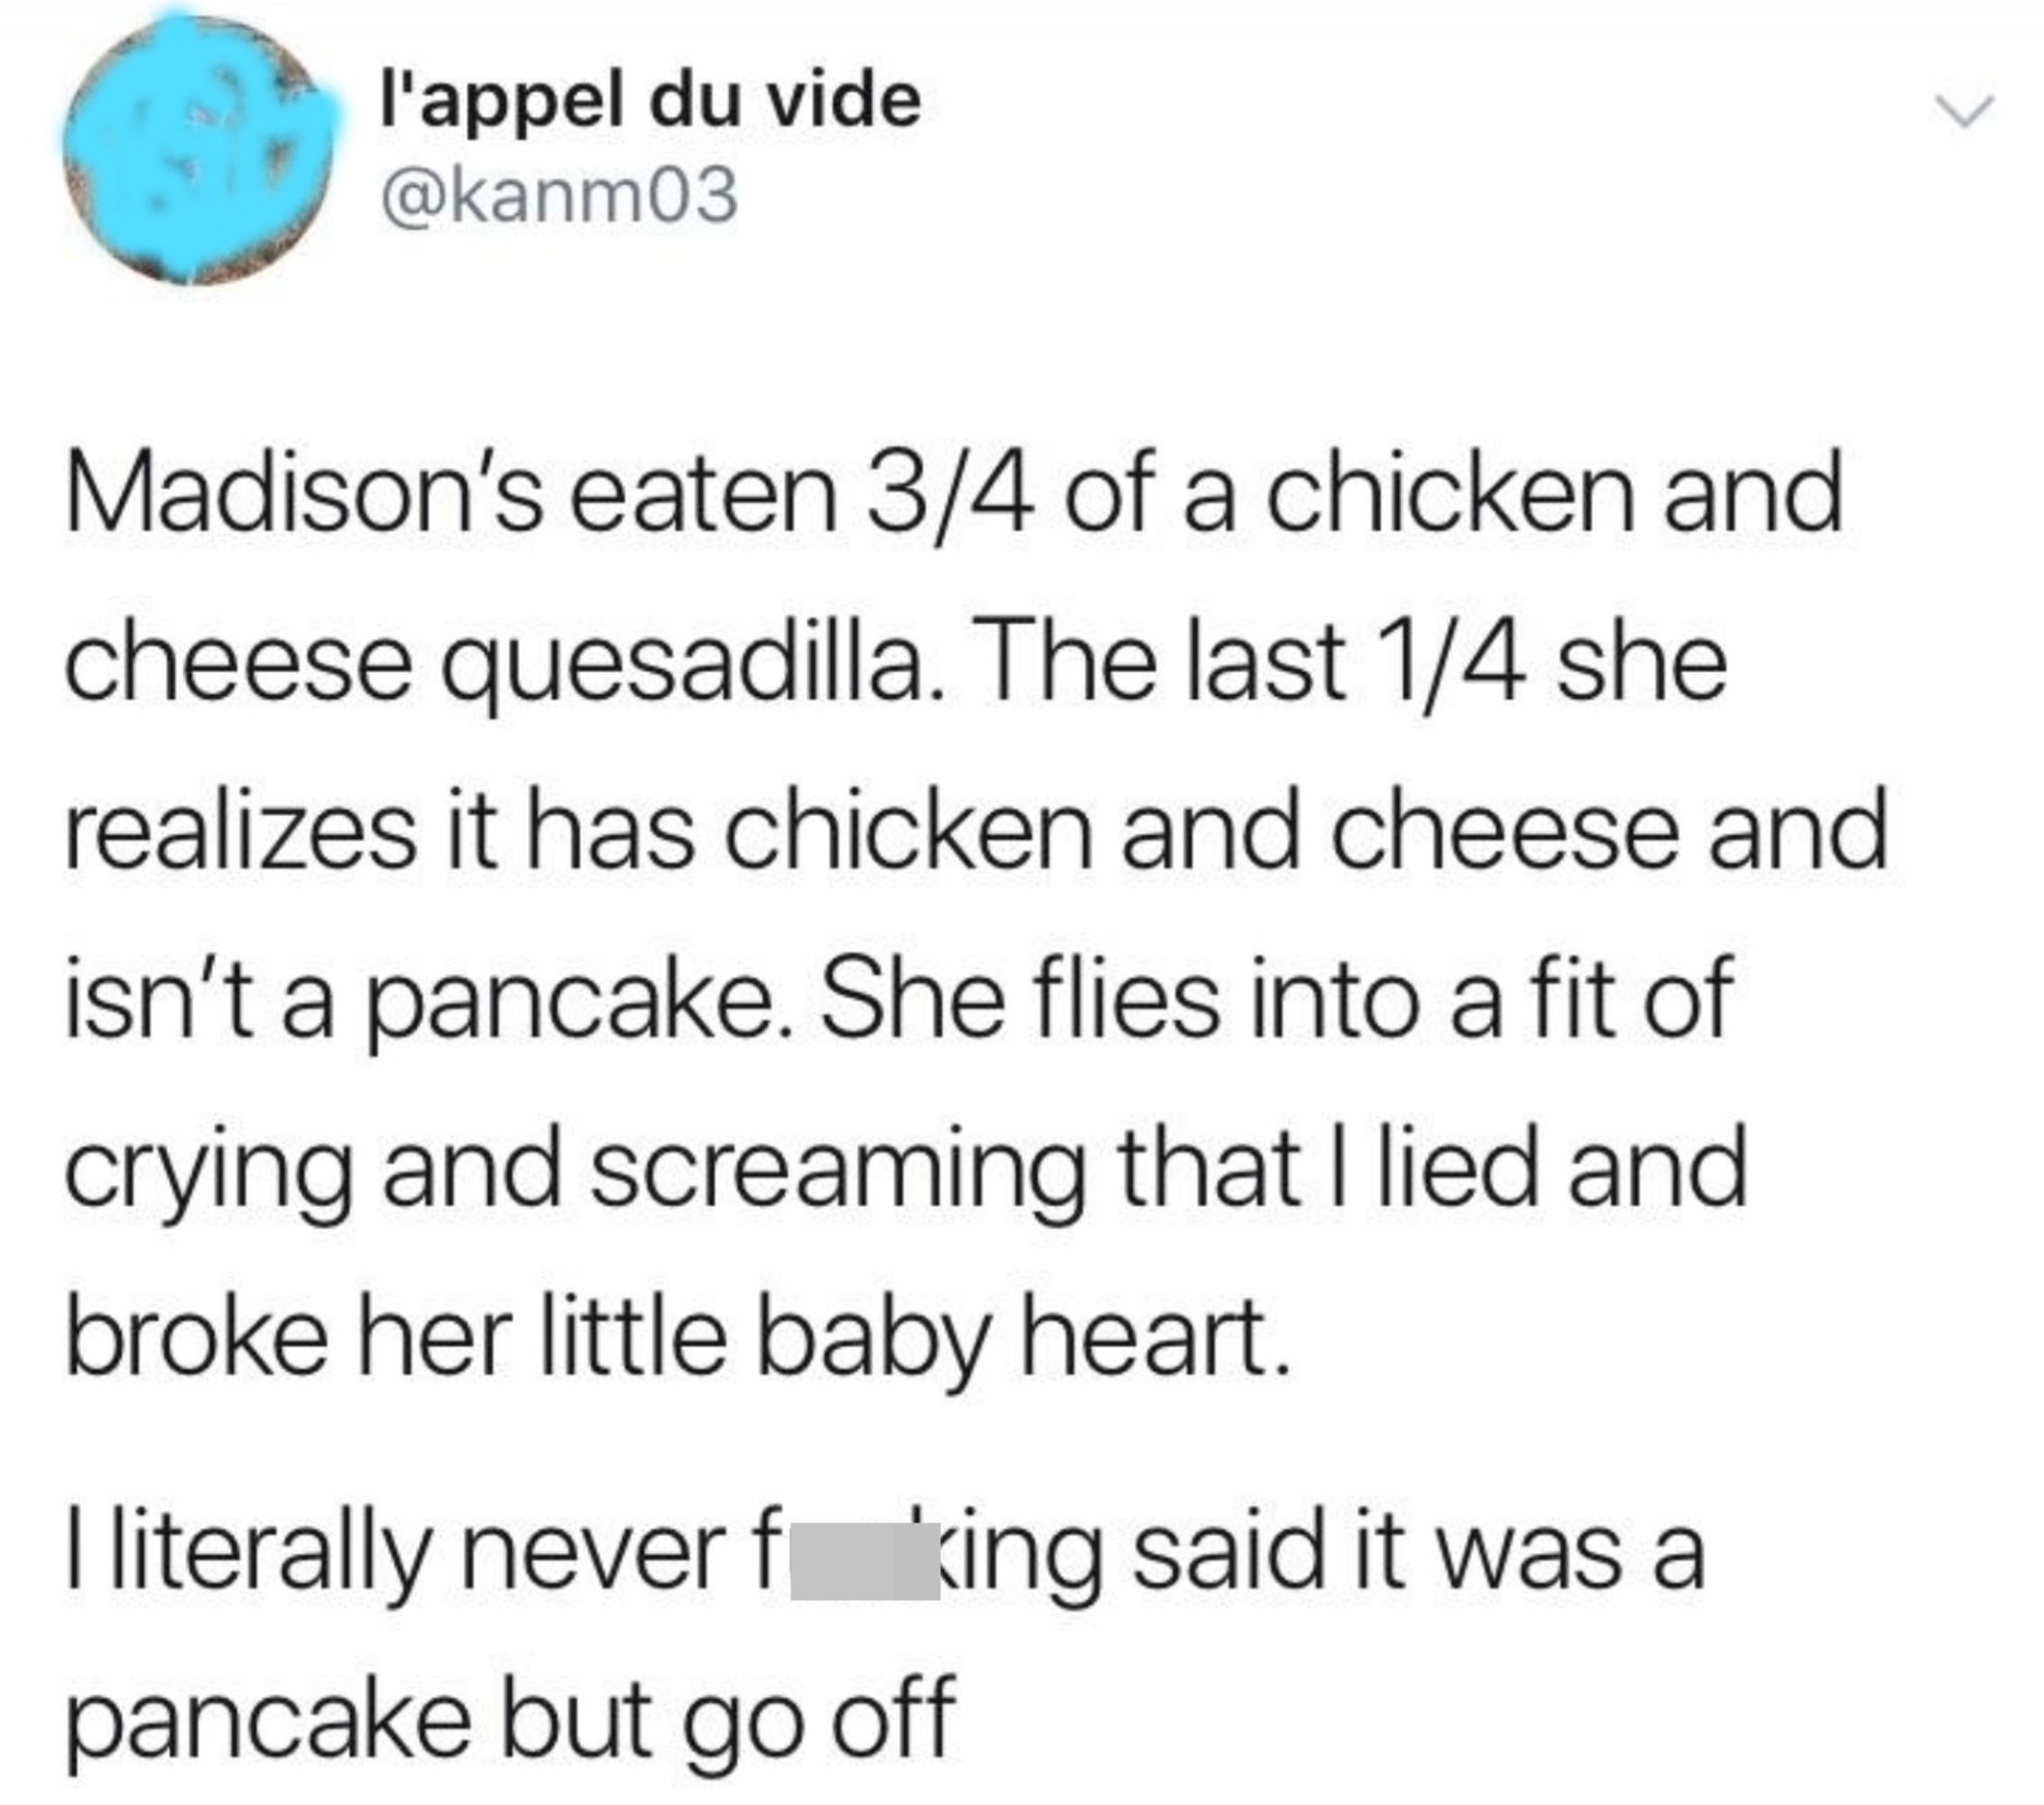 Child eats almost all of a chicken-and-cheese quesadilla and then has a fit because she realizes it&#x27;s not a pancake and thinks her parent lied to her